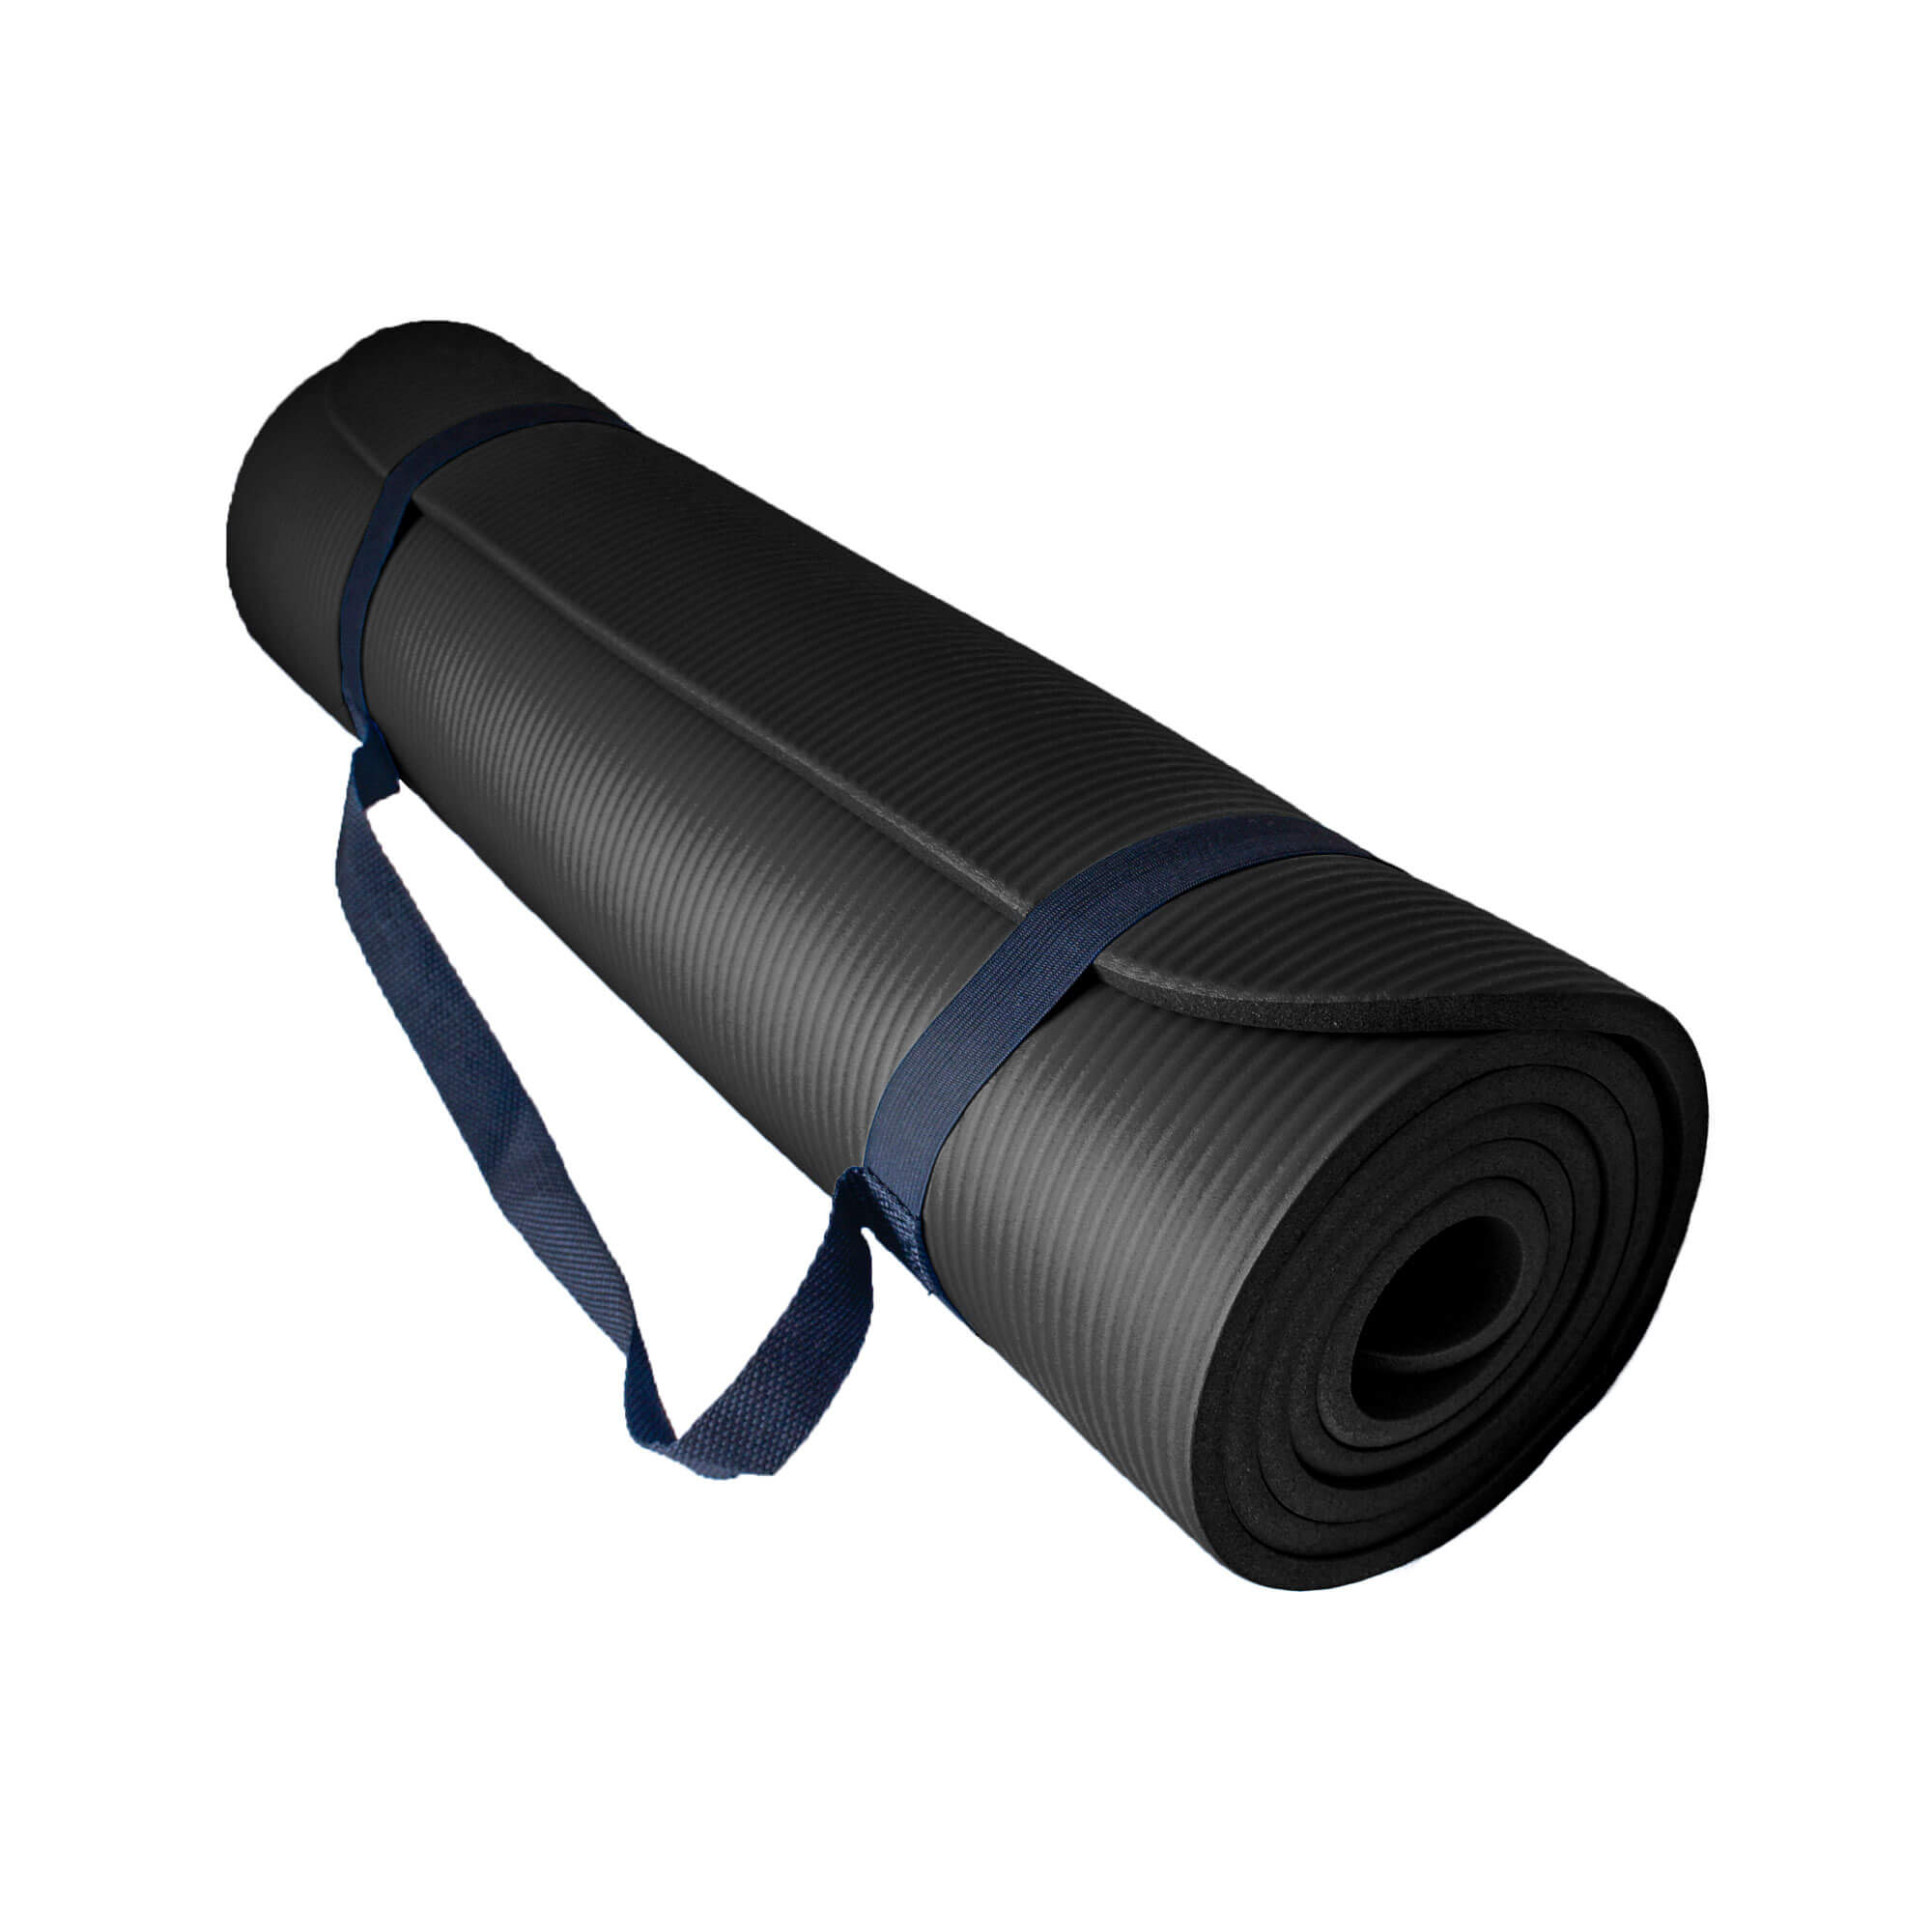 Adidas 10mm Training Mat with Carry Strap – Workout For Less